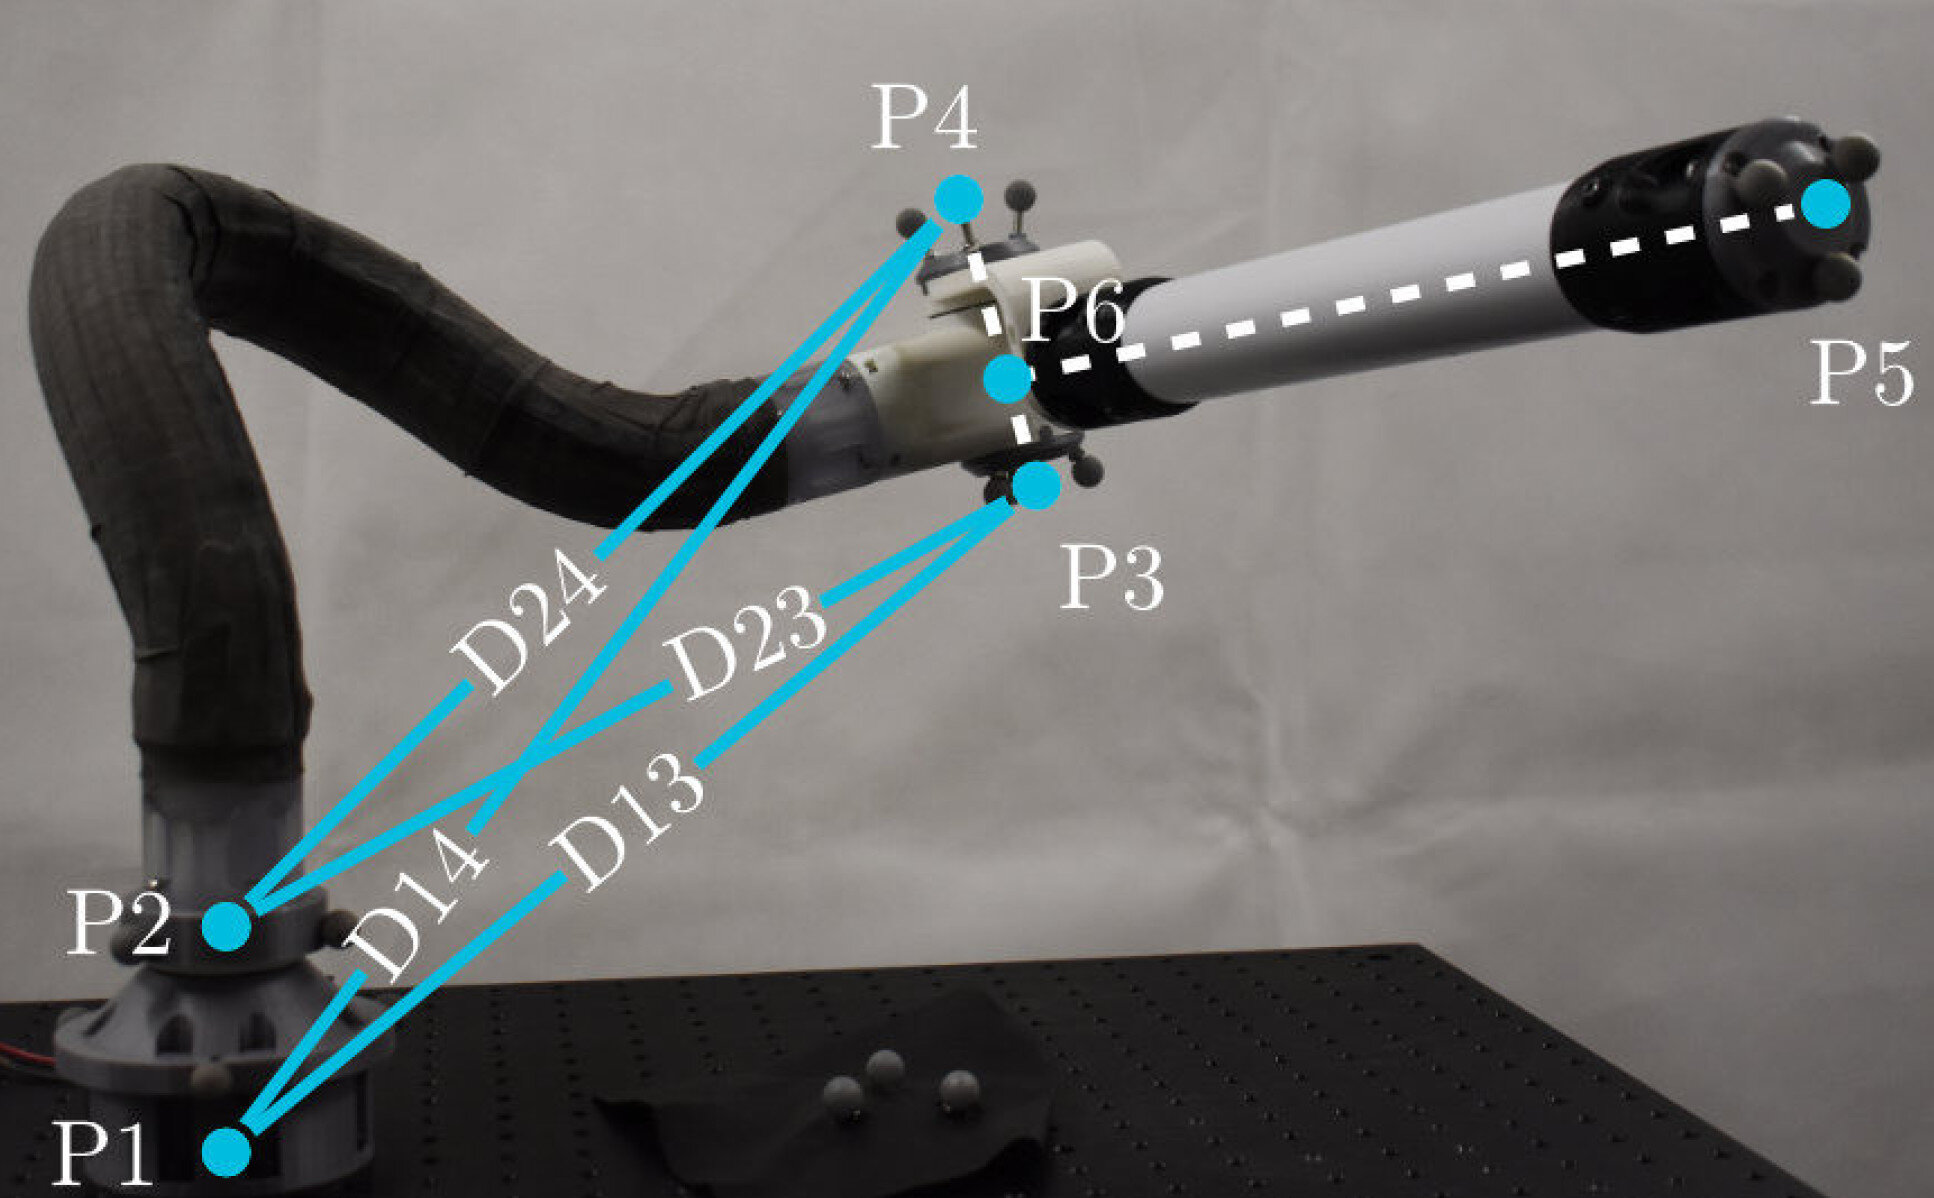 #Bendy robotic arm twisted into shape with help of augmented reality